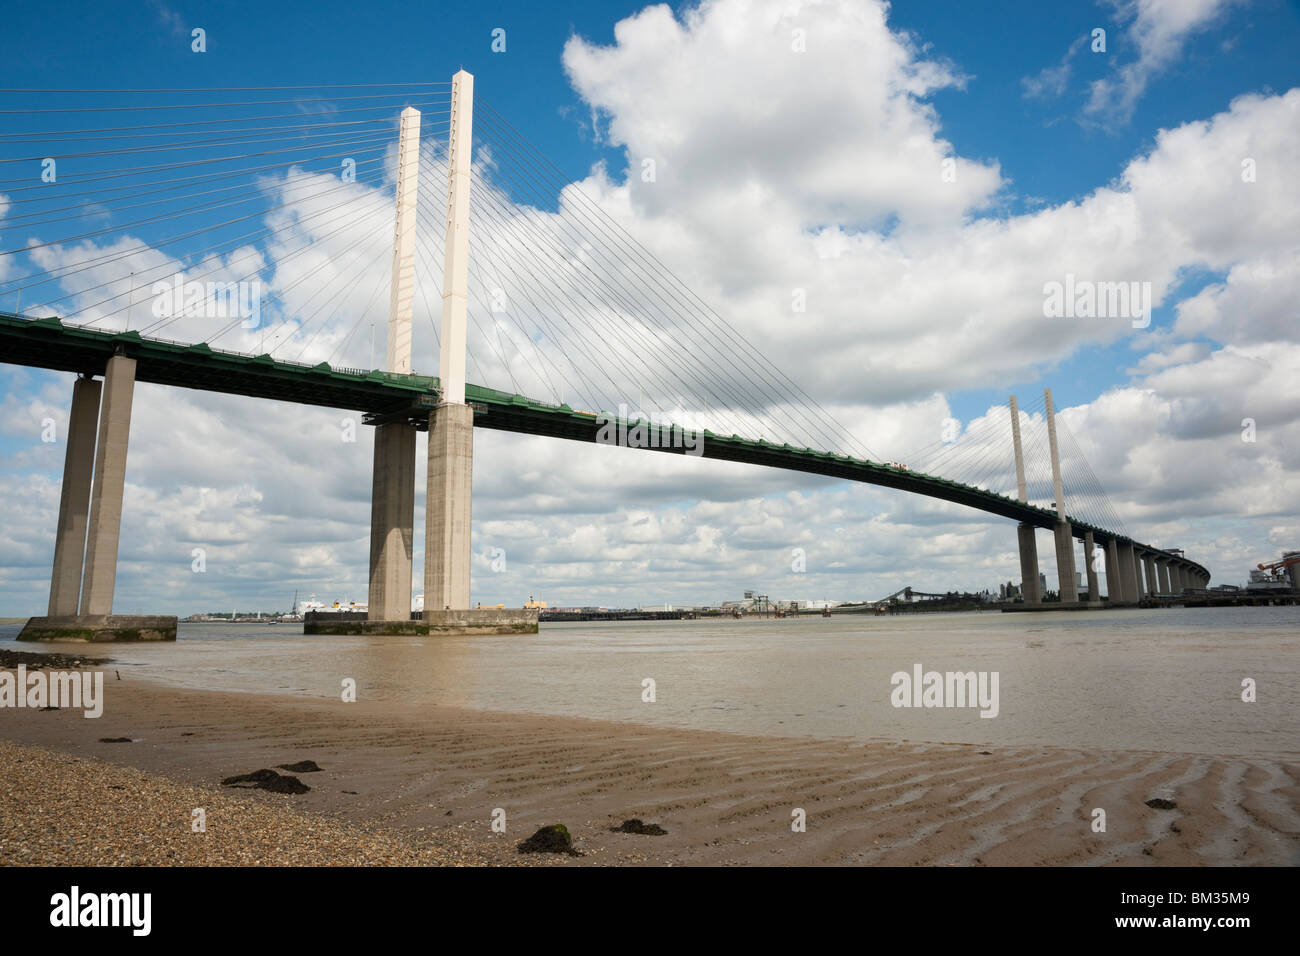 Queen Elisabeth II bridge over river Thames in Dartford with pebbles in the foreground against blue sky with white clouds Stock Photo